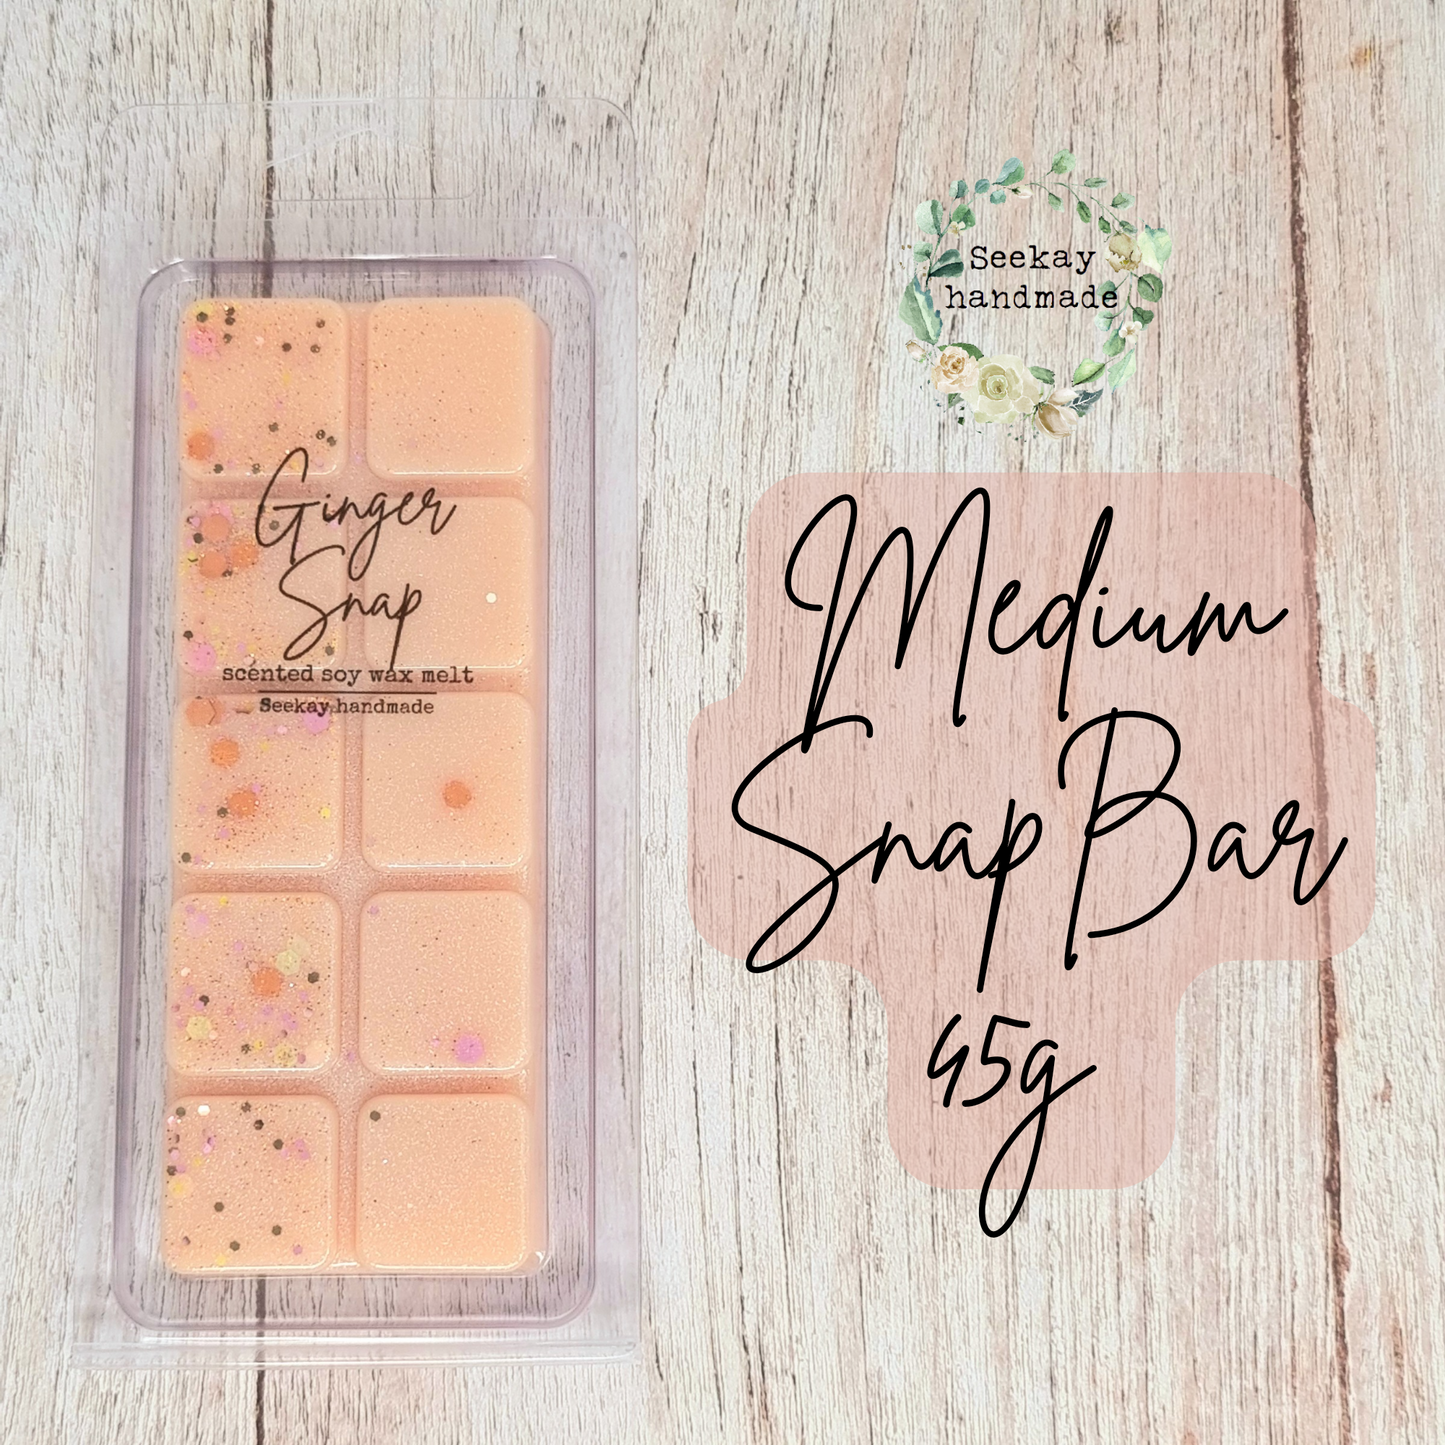 Ginger Snap scented soy wax melt